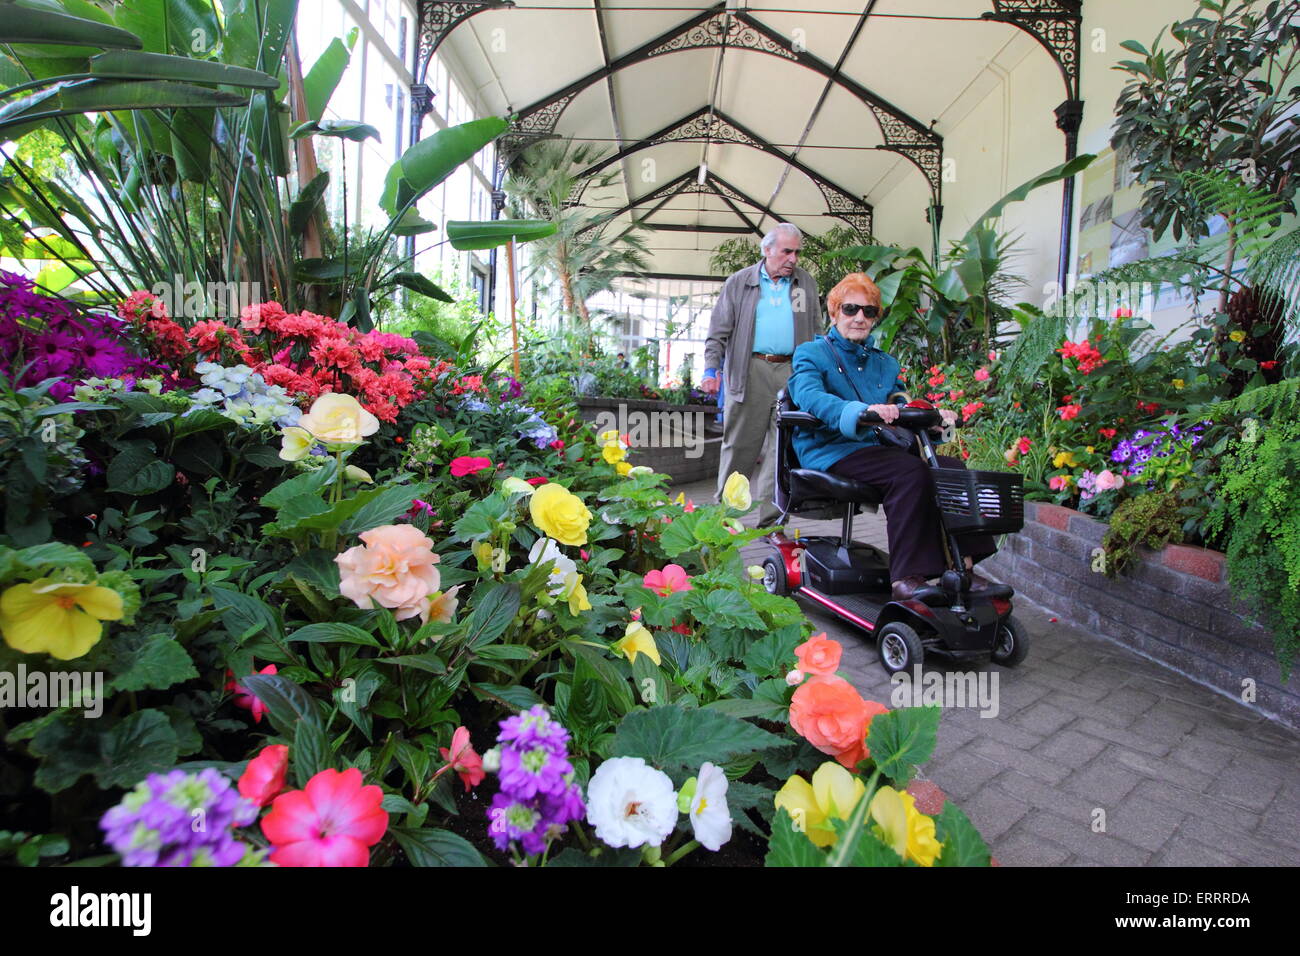 A woman in a mobility scooter surveys the floral display in the hothouse at the Pavilion Gardens in Buxton Derbyshire England UK Stock Photo